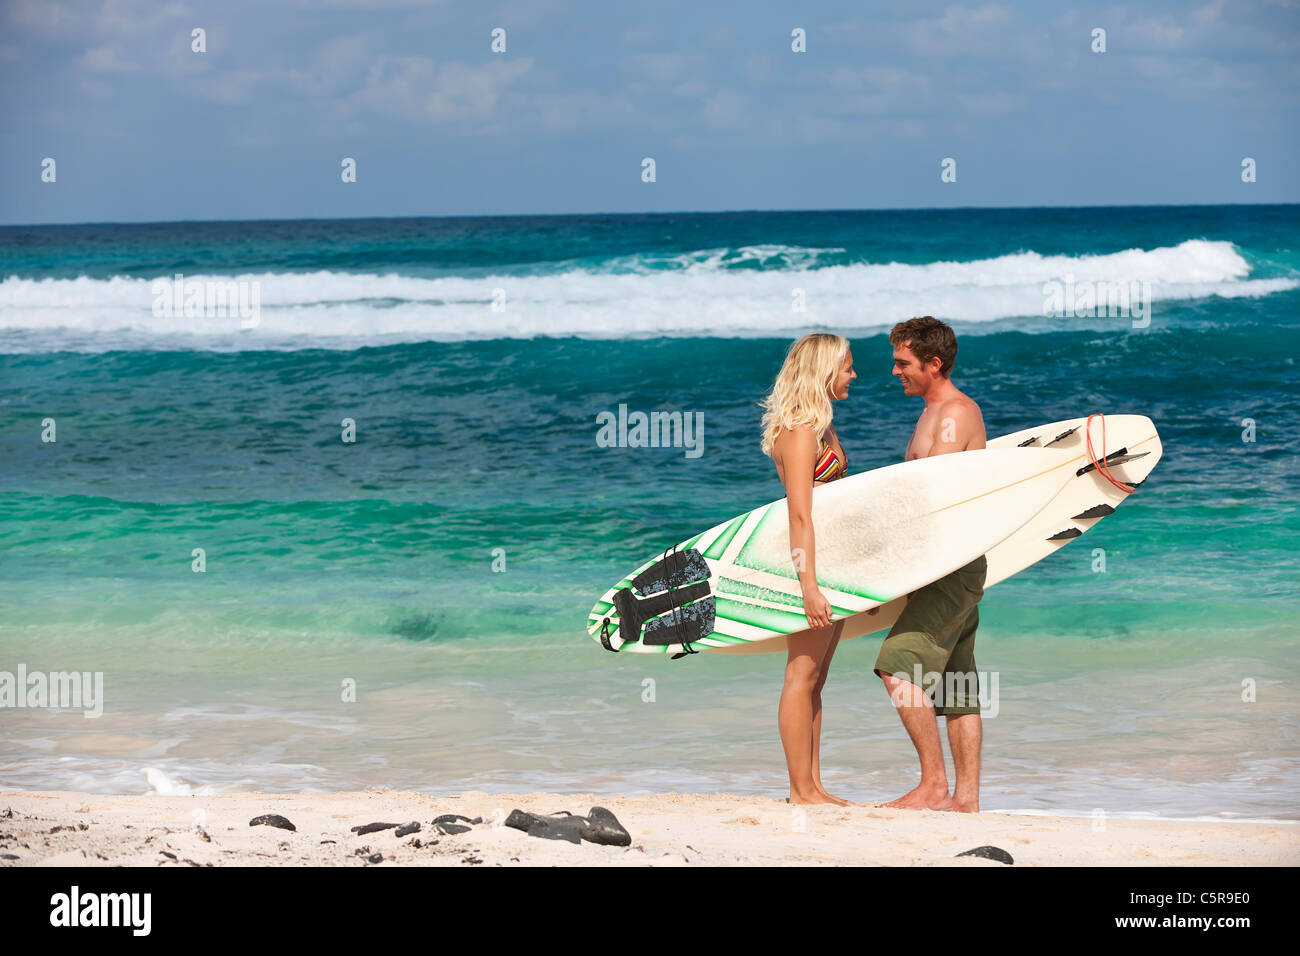 A surfing couple on beach. Stock Photo